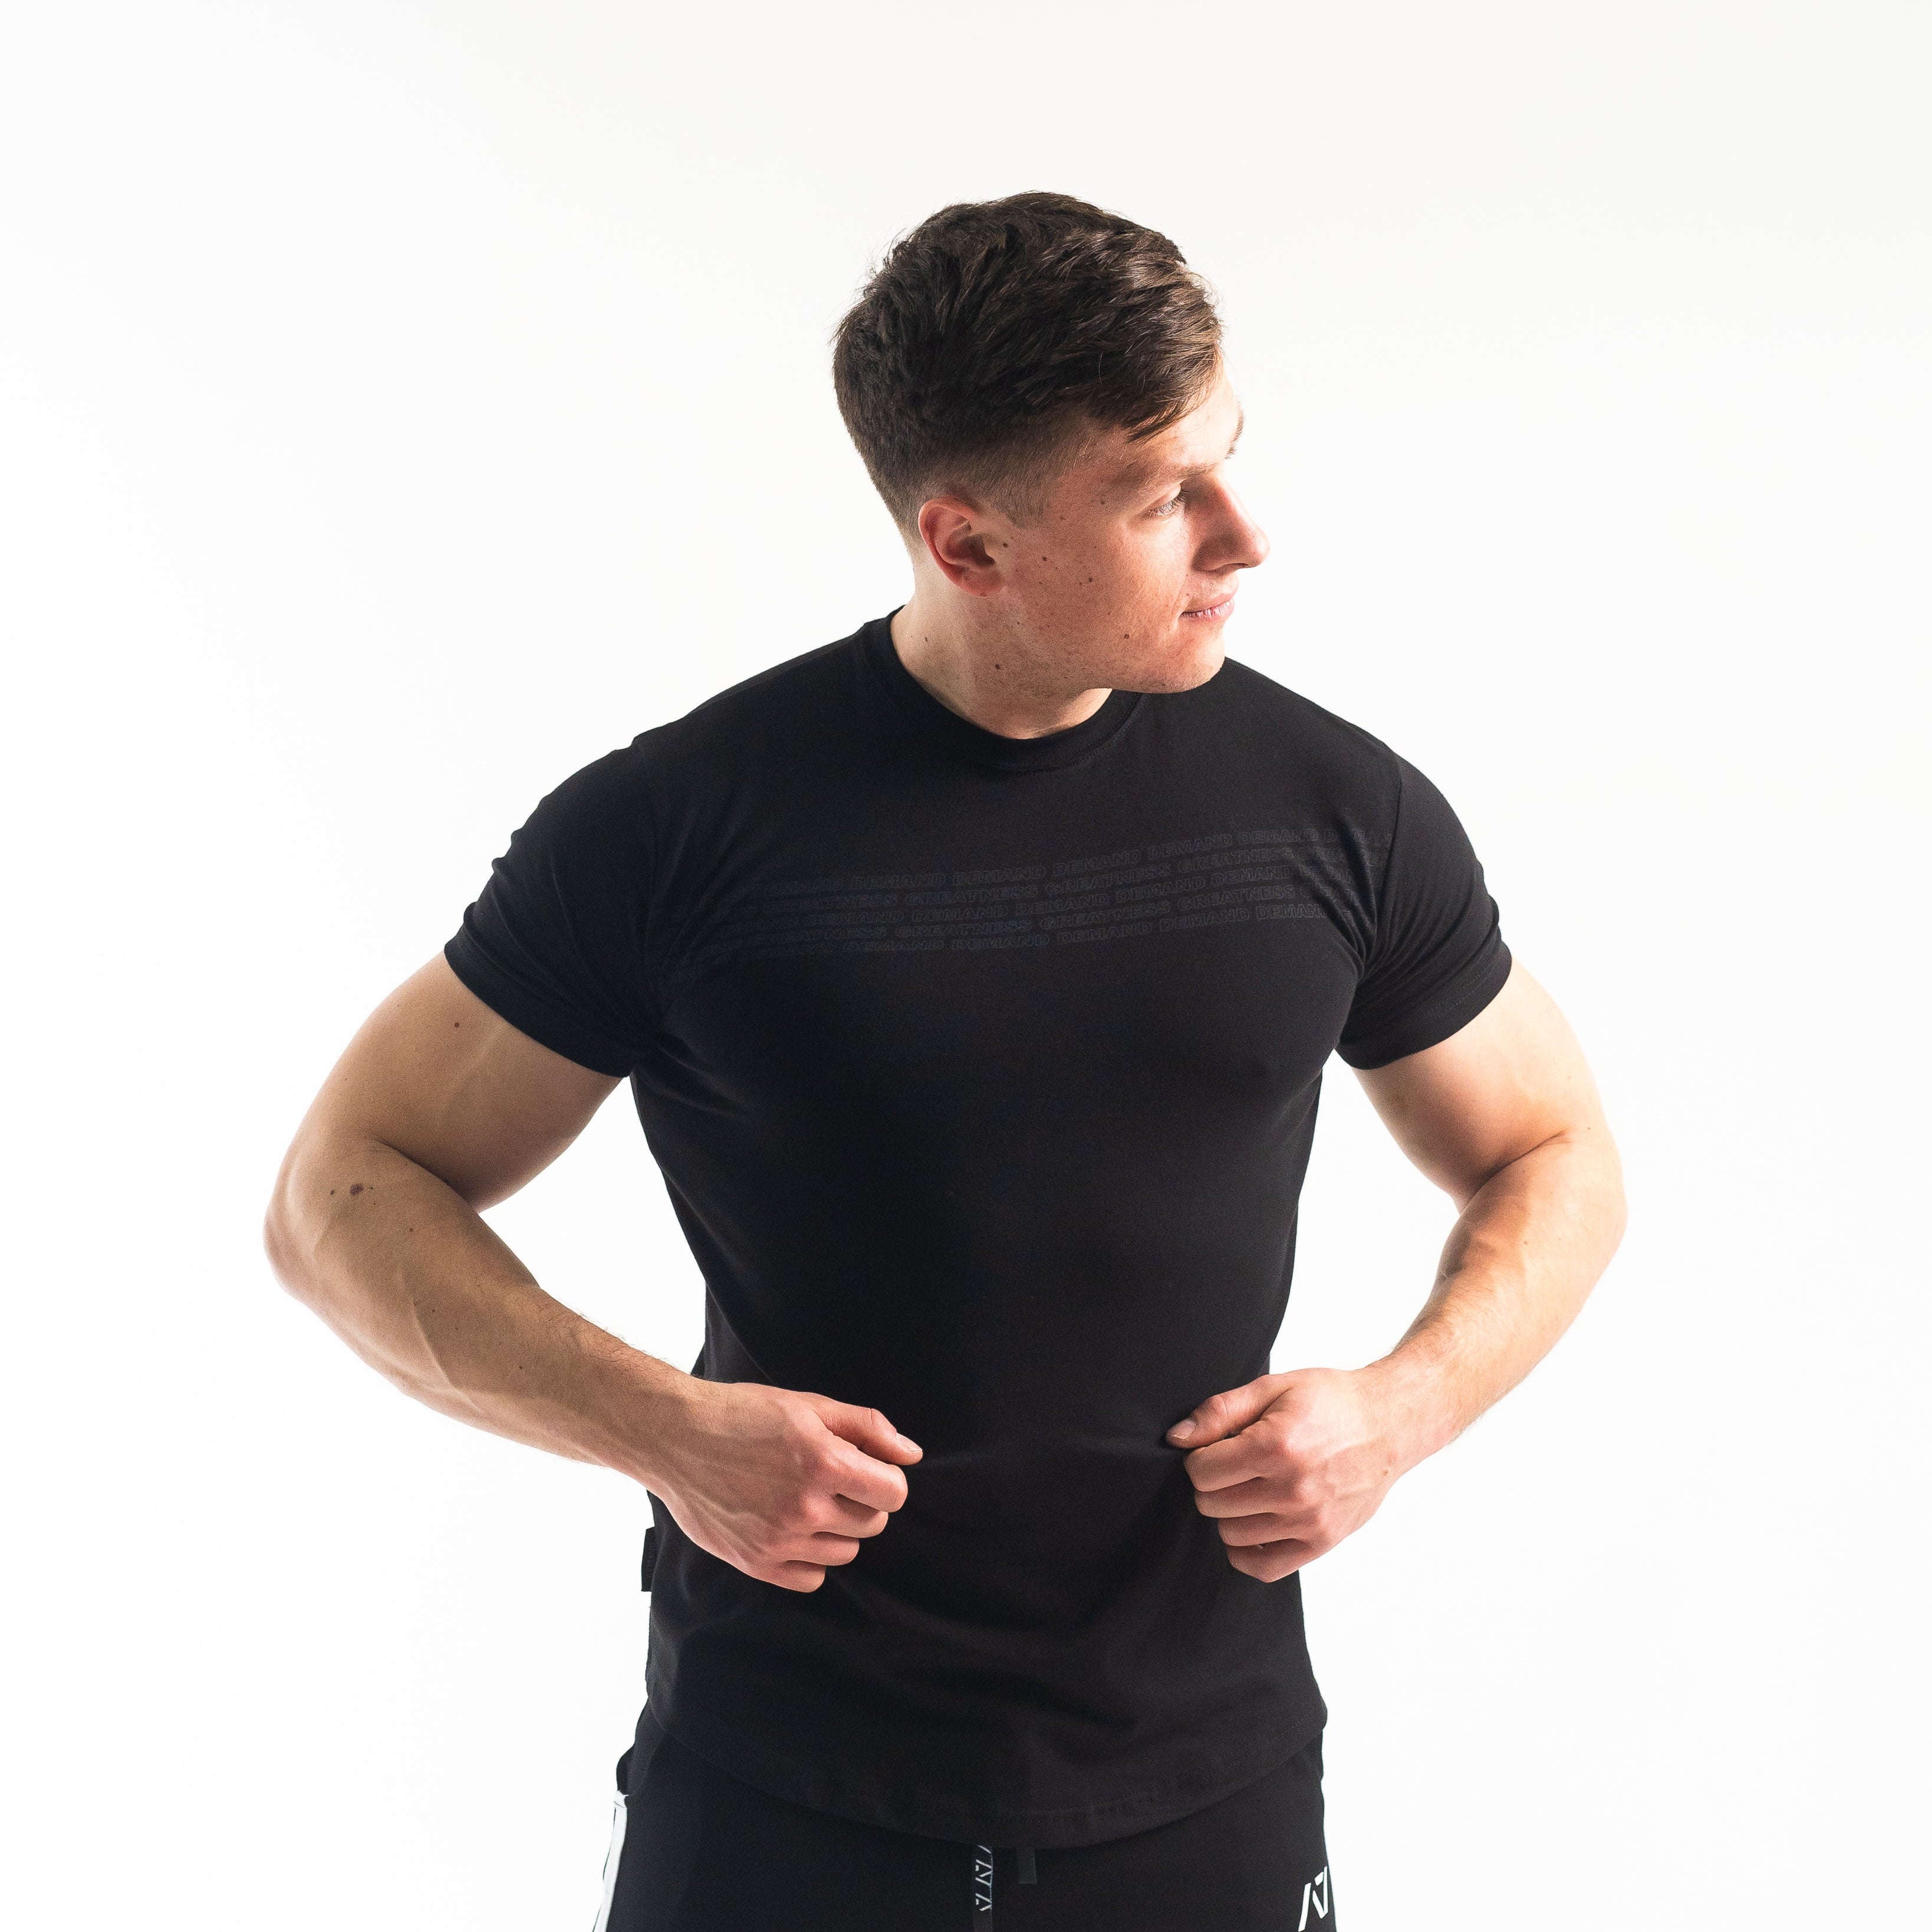 Purchase Stealth Wave Non Bar Grip Shirt from A7 UK, shipping to UK, Norway, Switzerland and Iceland